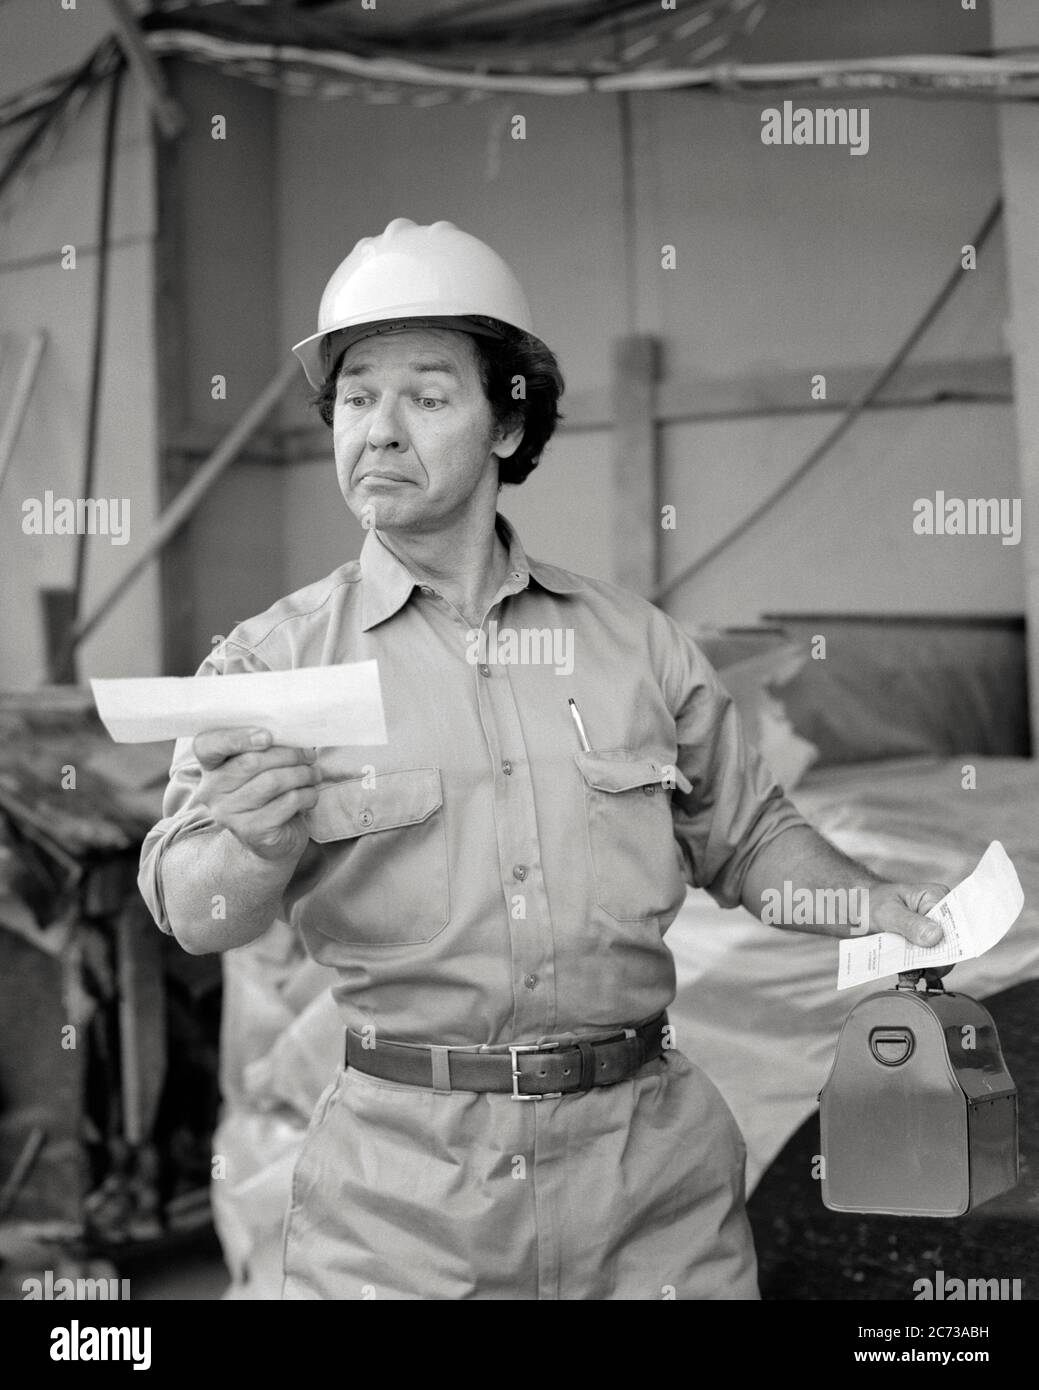 1970s SURPRISED WORKMAN WEARING WORK CLOTHES HARD HAT CARRYING LUNCH BOX HOLDING PAYCHECK WITH SATISFIED FACIAL EXPRESSION - s20555 HAR001 HARS WORKMAN PLEASED LIFESTYLE SATISFACTION JOBS SITE COPY SPACE HALF-LENGTH PERSONS INSPIRATION MALES CONFIDENCE EXPRESSIONS SMUG MIDDLE-AGED B&W BLUE COLLAR SKILL OCCUPATION SKILLS PAYCHECK SATISFIED DISCOVERY MANUAL HARD HAT PAY EXCITEMENT LABOR EMPLOYMENT OCCUPATIONS CONNECTION SALARY MOTIVATED EMPLOYEE WAGES MID-ADULT MID-ADULT MAN PAYDAY ALARMED BLACK AND WHITE BONUS CAUCASIAN ETHNICITY HAR001 LABORER LABORING OLD FASHIONED Stock Photo